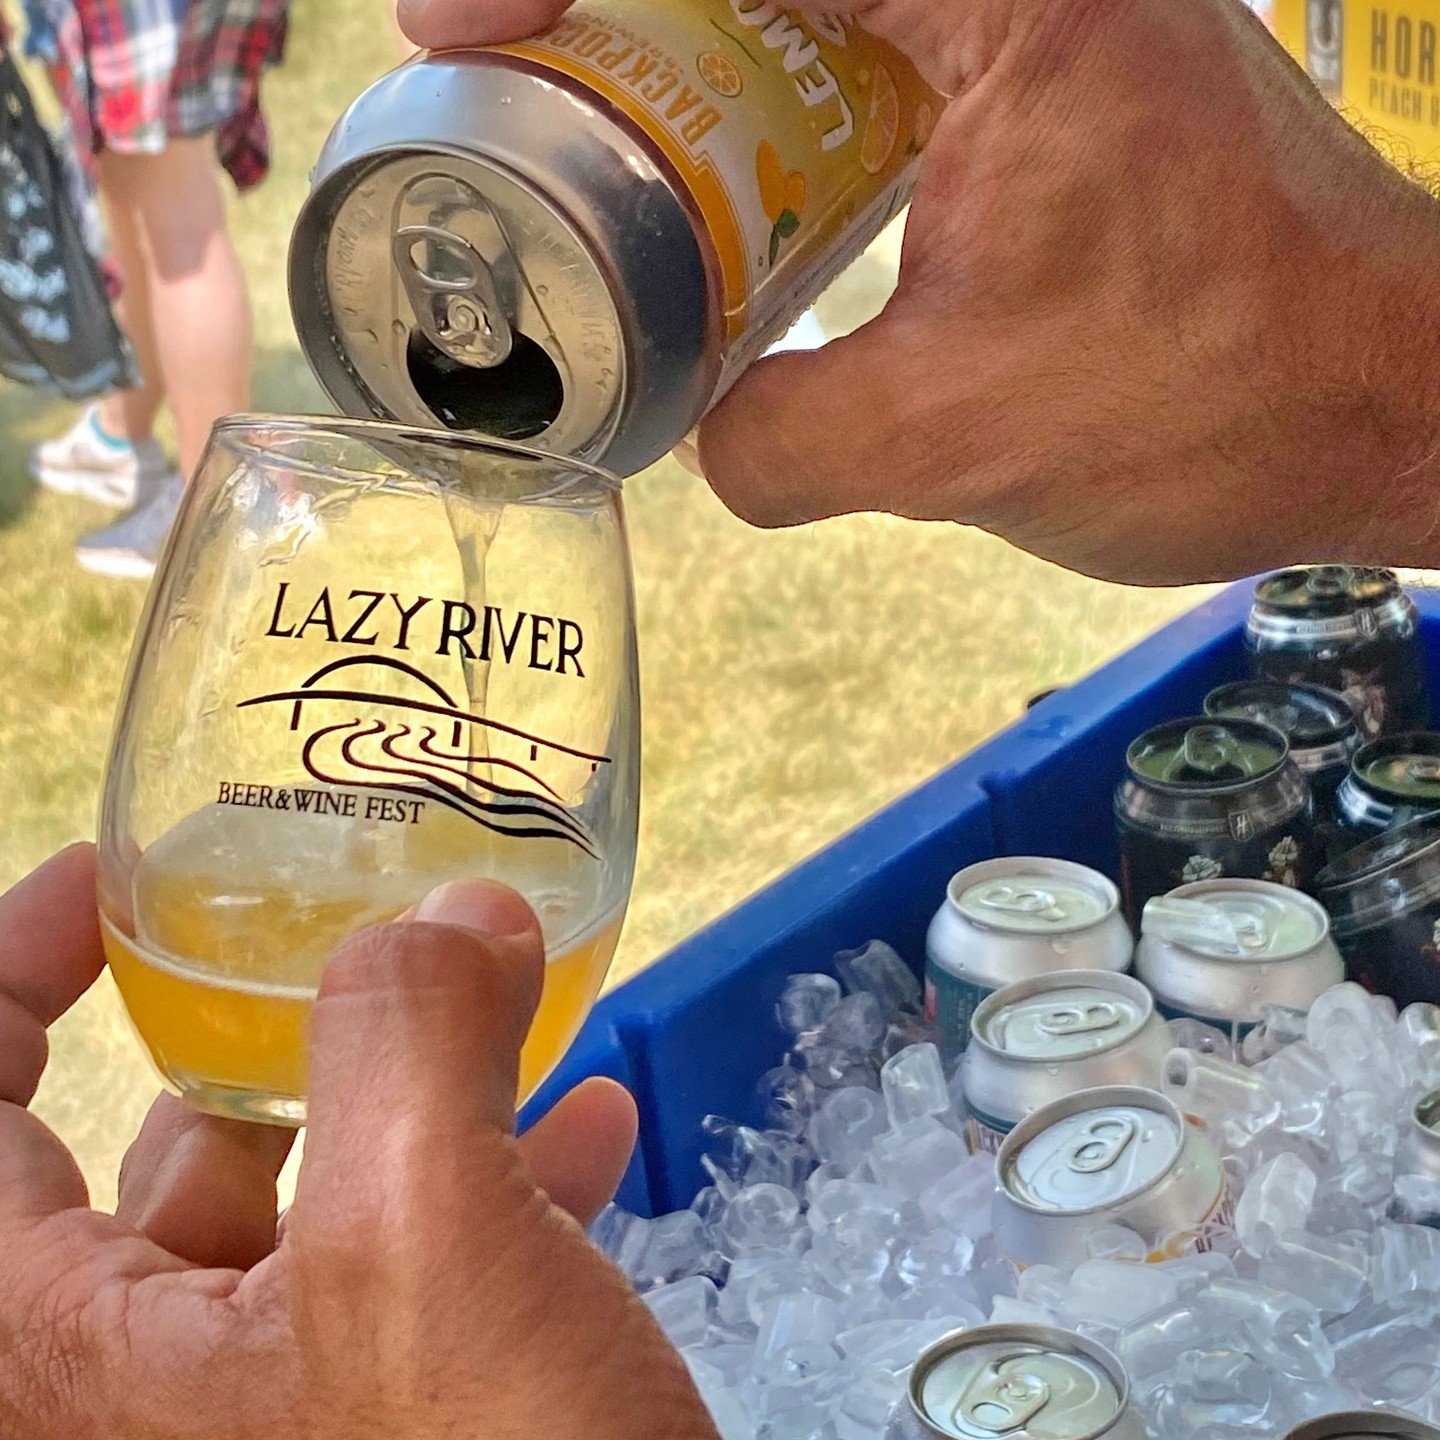 Treat yourself to an afternoon of friends, music, food and unlimited beer and wine sampling June 22nd beside the Mississippi River in Marquette, Iowa. Get your Lazy River Beer &amp;Wine Fest tickets through our website at www.mcgreg-marq.org under th